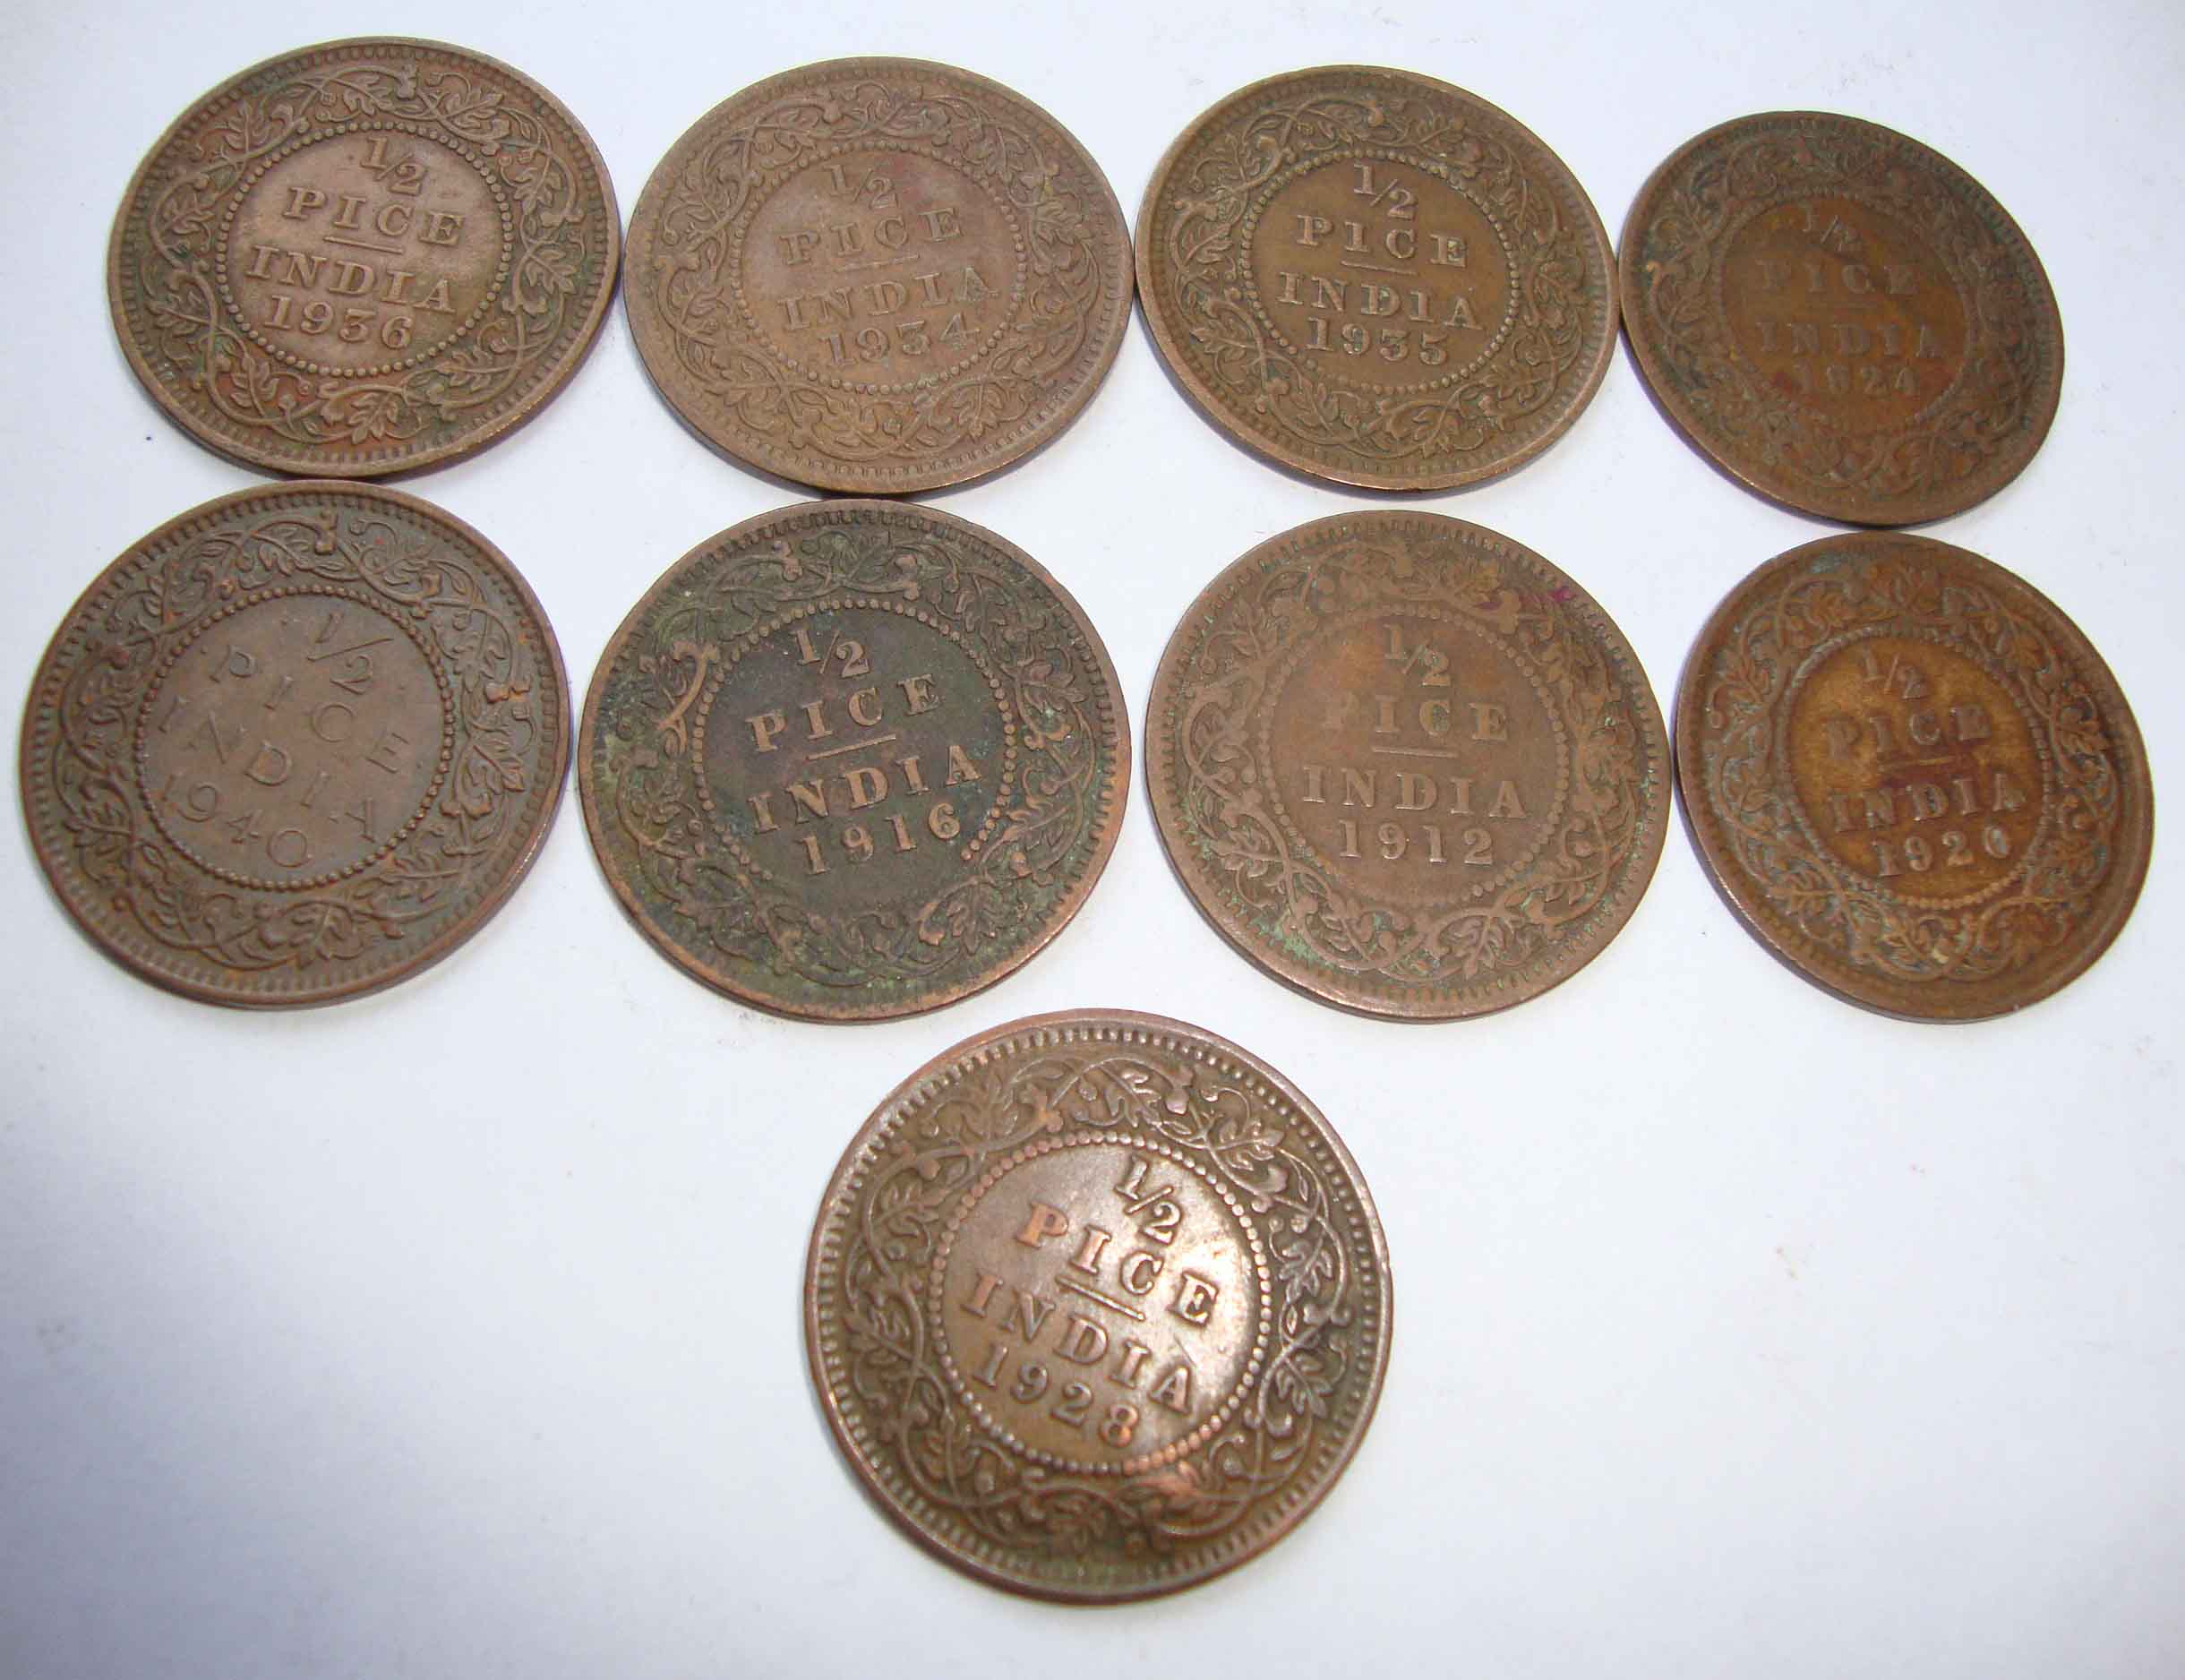 Where can I find prices of rare coins?